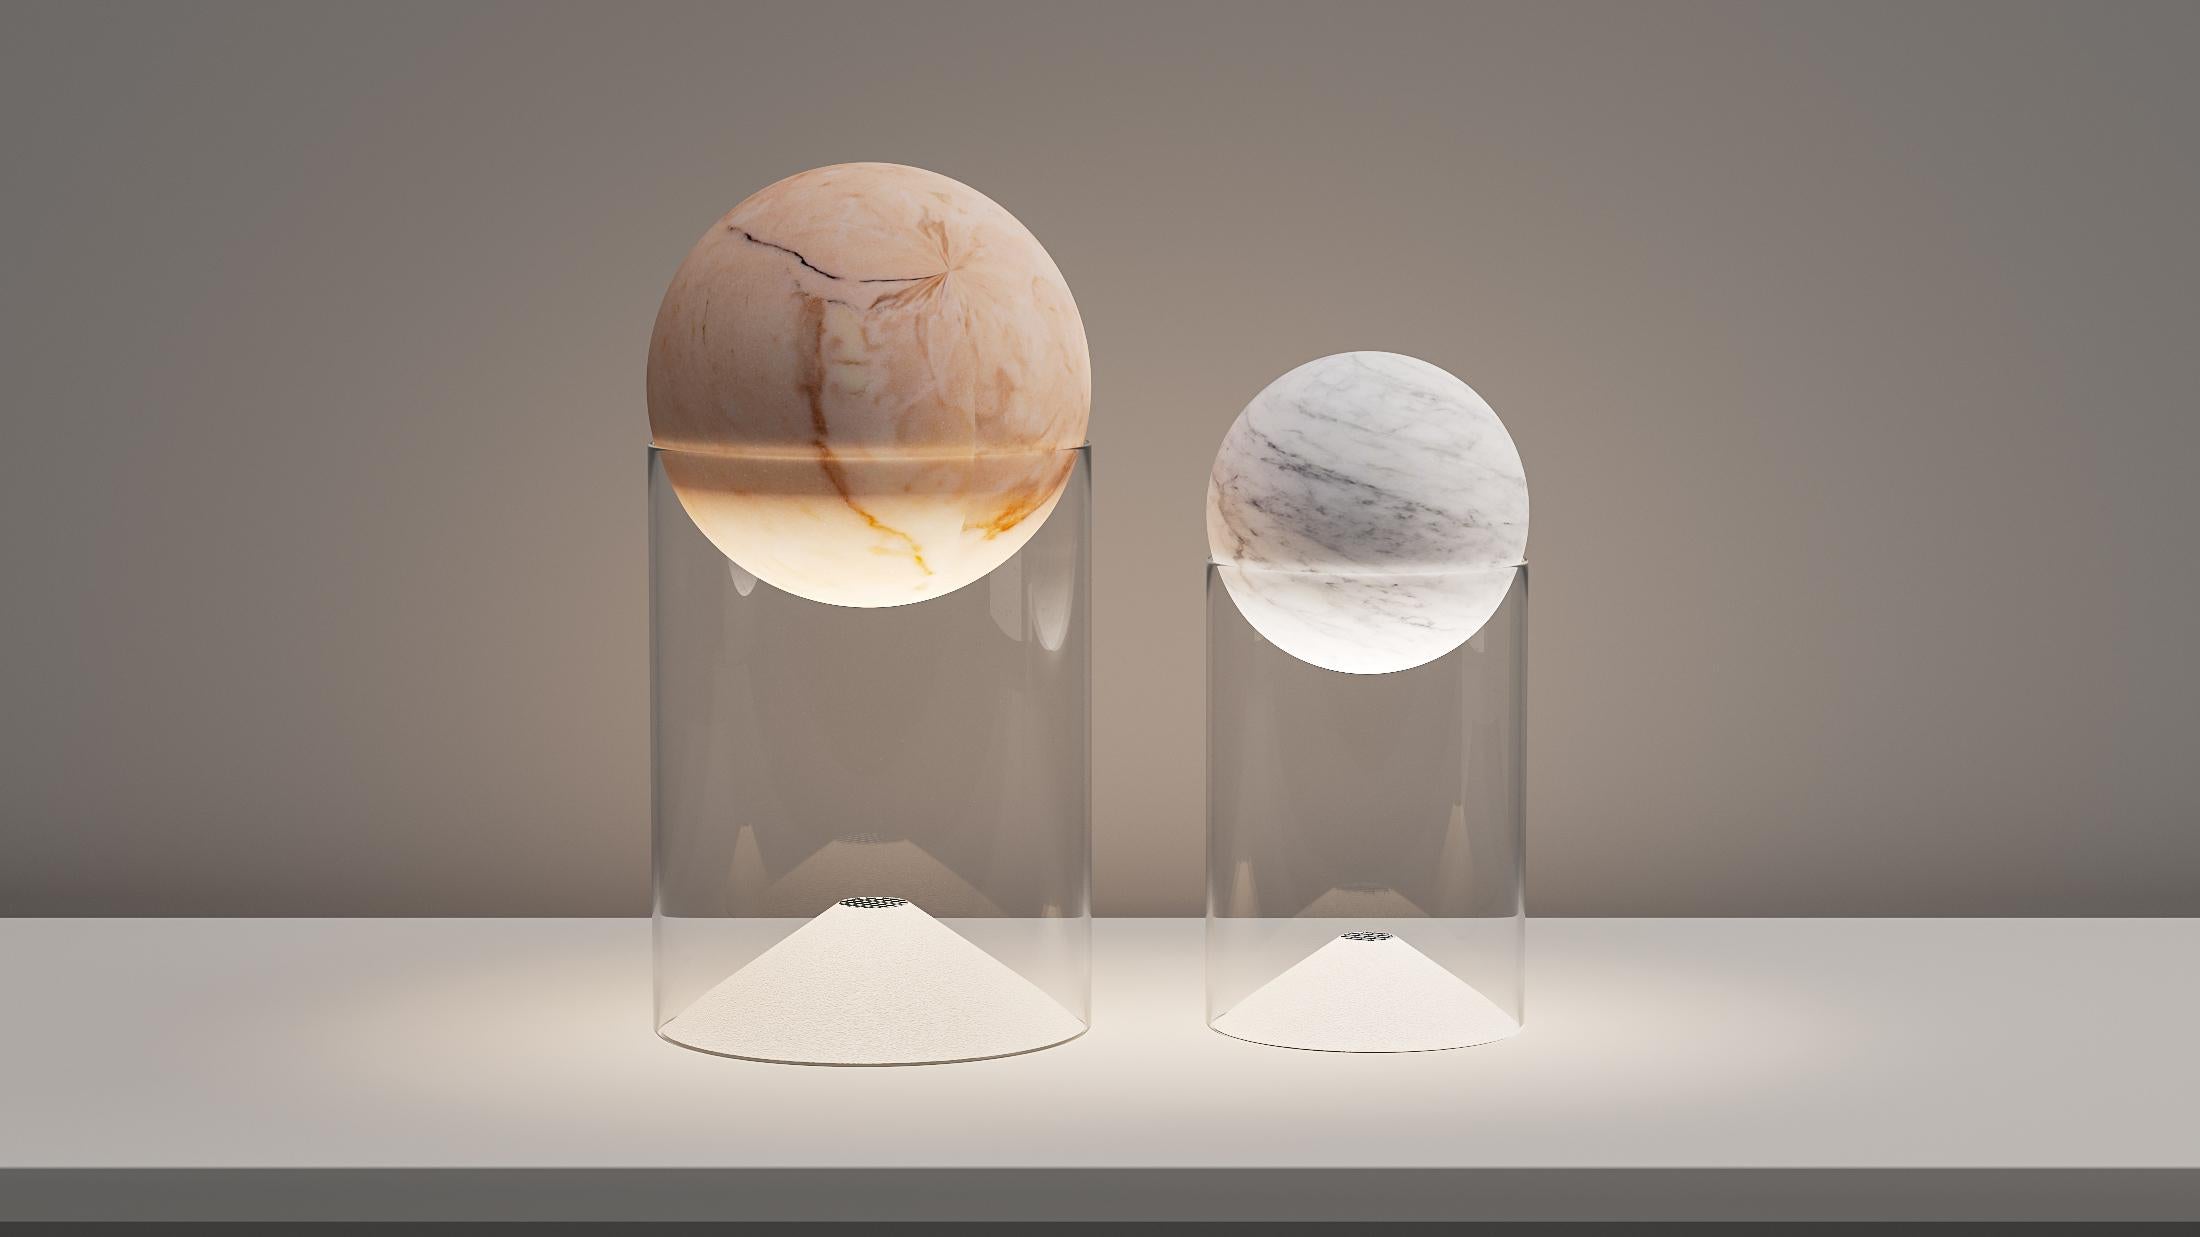 Set of 2 Lunar table lamps by Studio Roso
Dimensions: D15 x H29.5 cm // D10 x H22.5 cm
Material: Stone (marble or sandstone), glass
Weight: 6.3 kg 

All our lamps can be wired according to each country. If sold to the USA it will be wired for